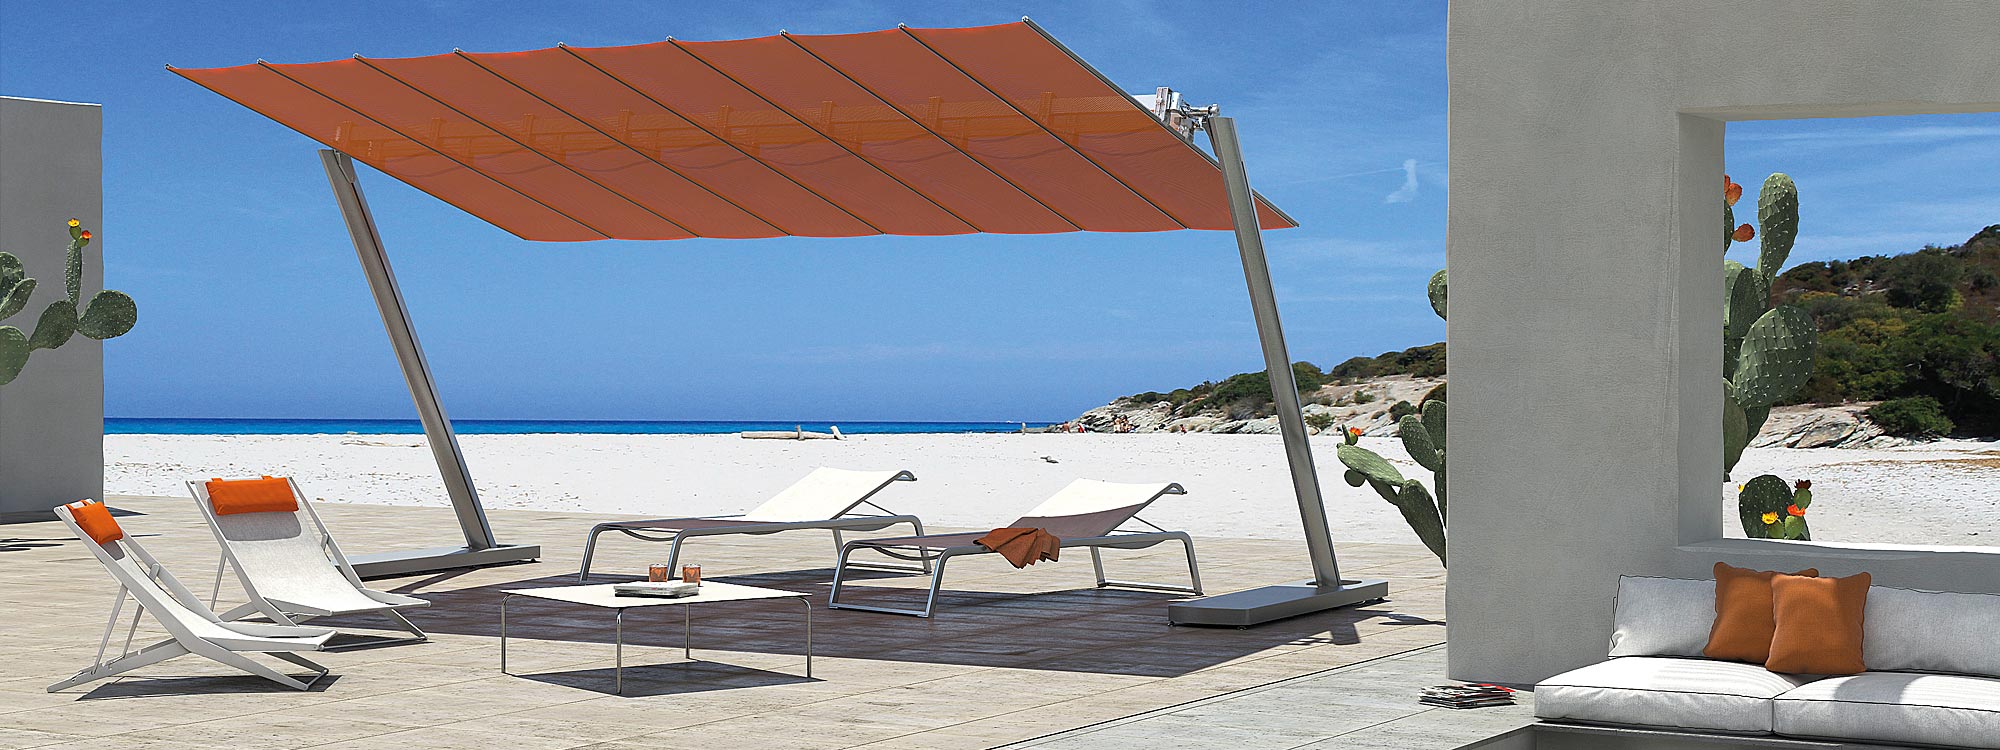 Orange Flexy Zen retractable awning shading Coro L3 loungers and Boomy folding chairs. Shown on decking on hot and sandy beach.